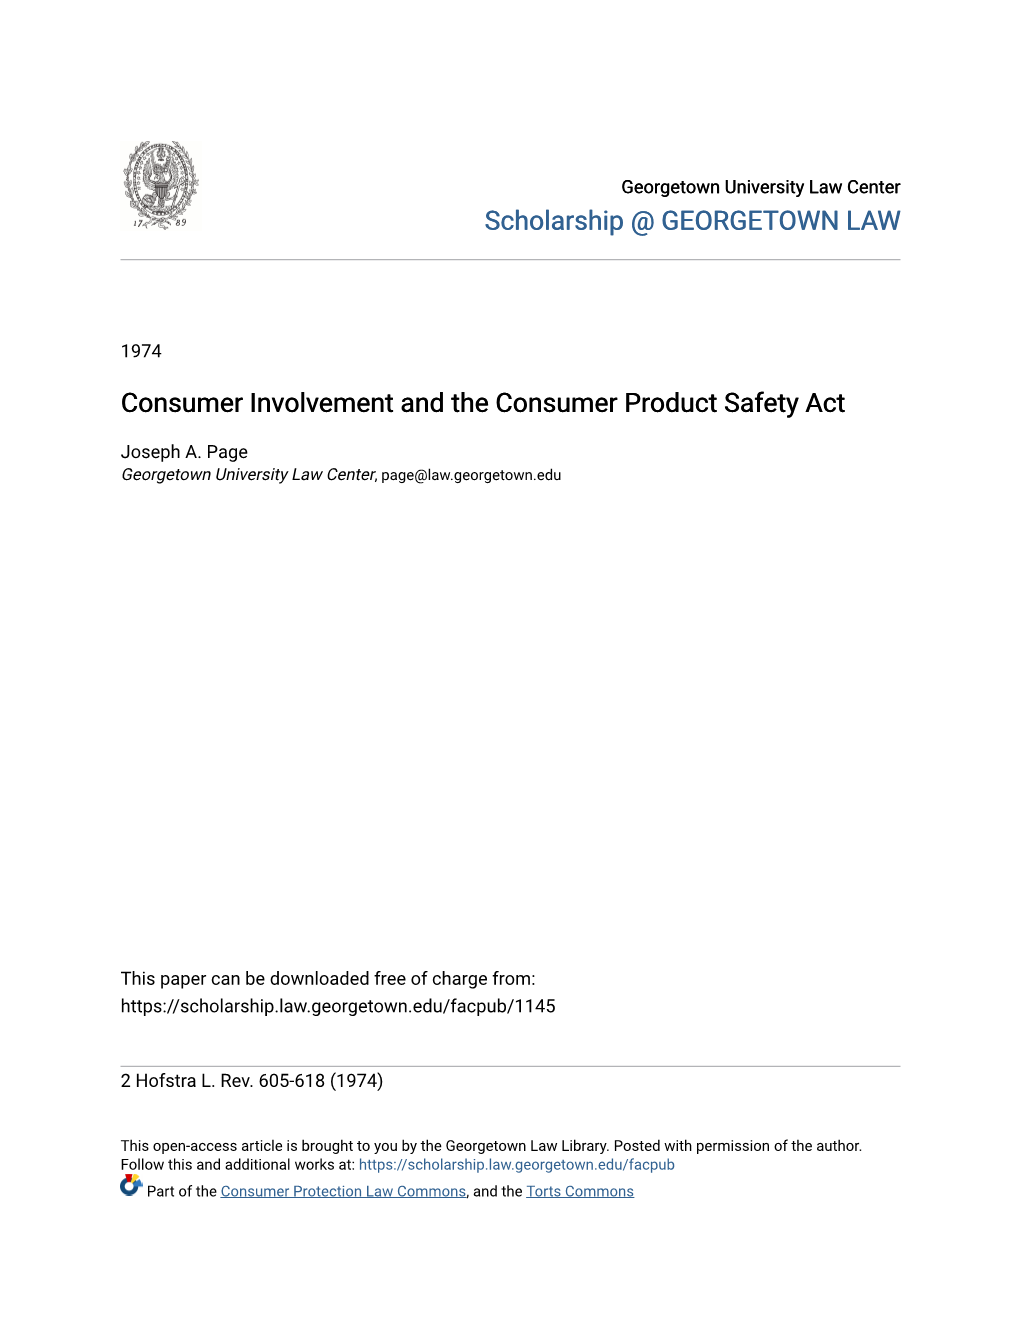 Consumer Involvement and the Consumer Product Safety Act